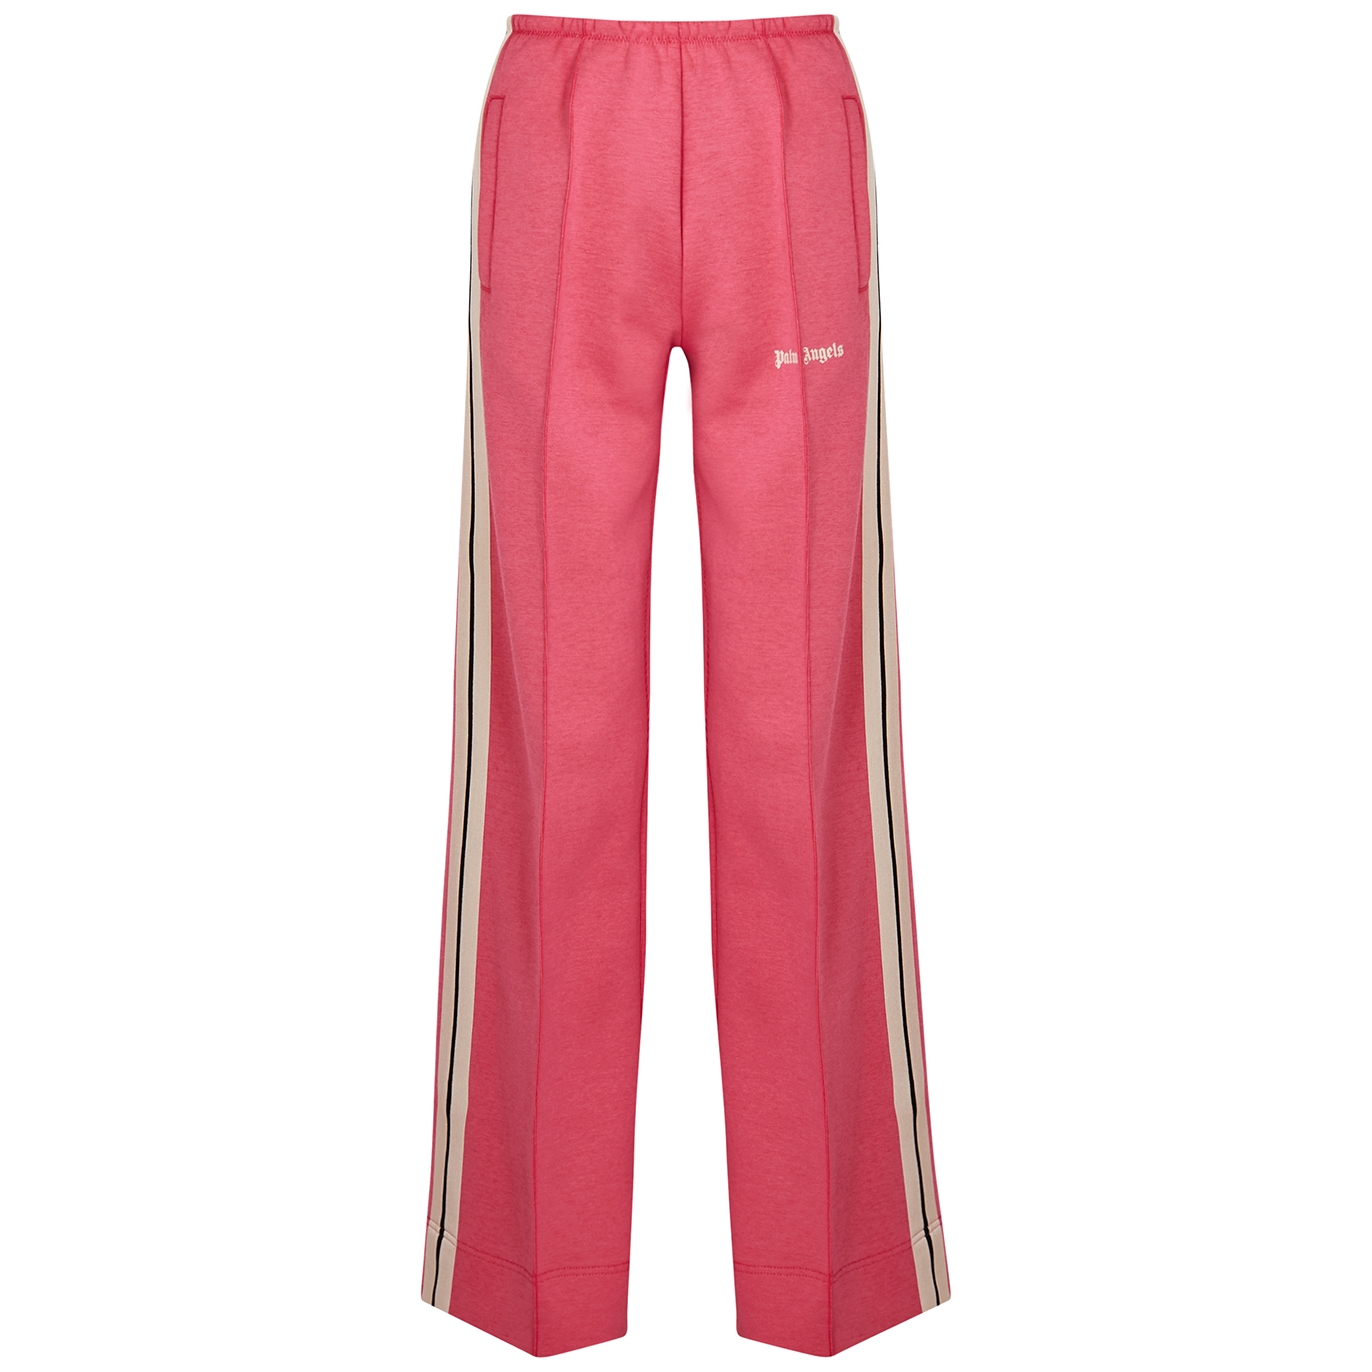 Palm Angels Pink Striped Jersey Track Pants - M